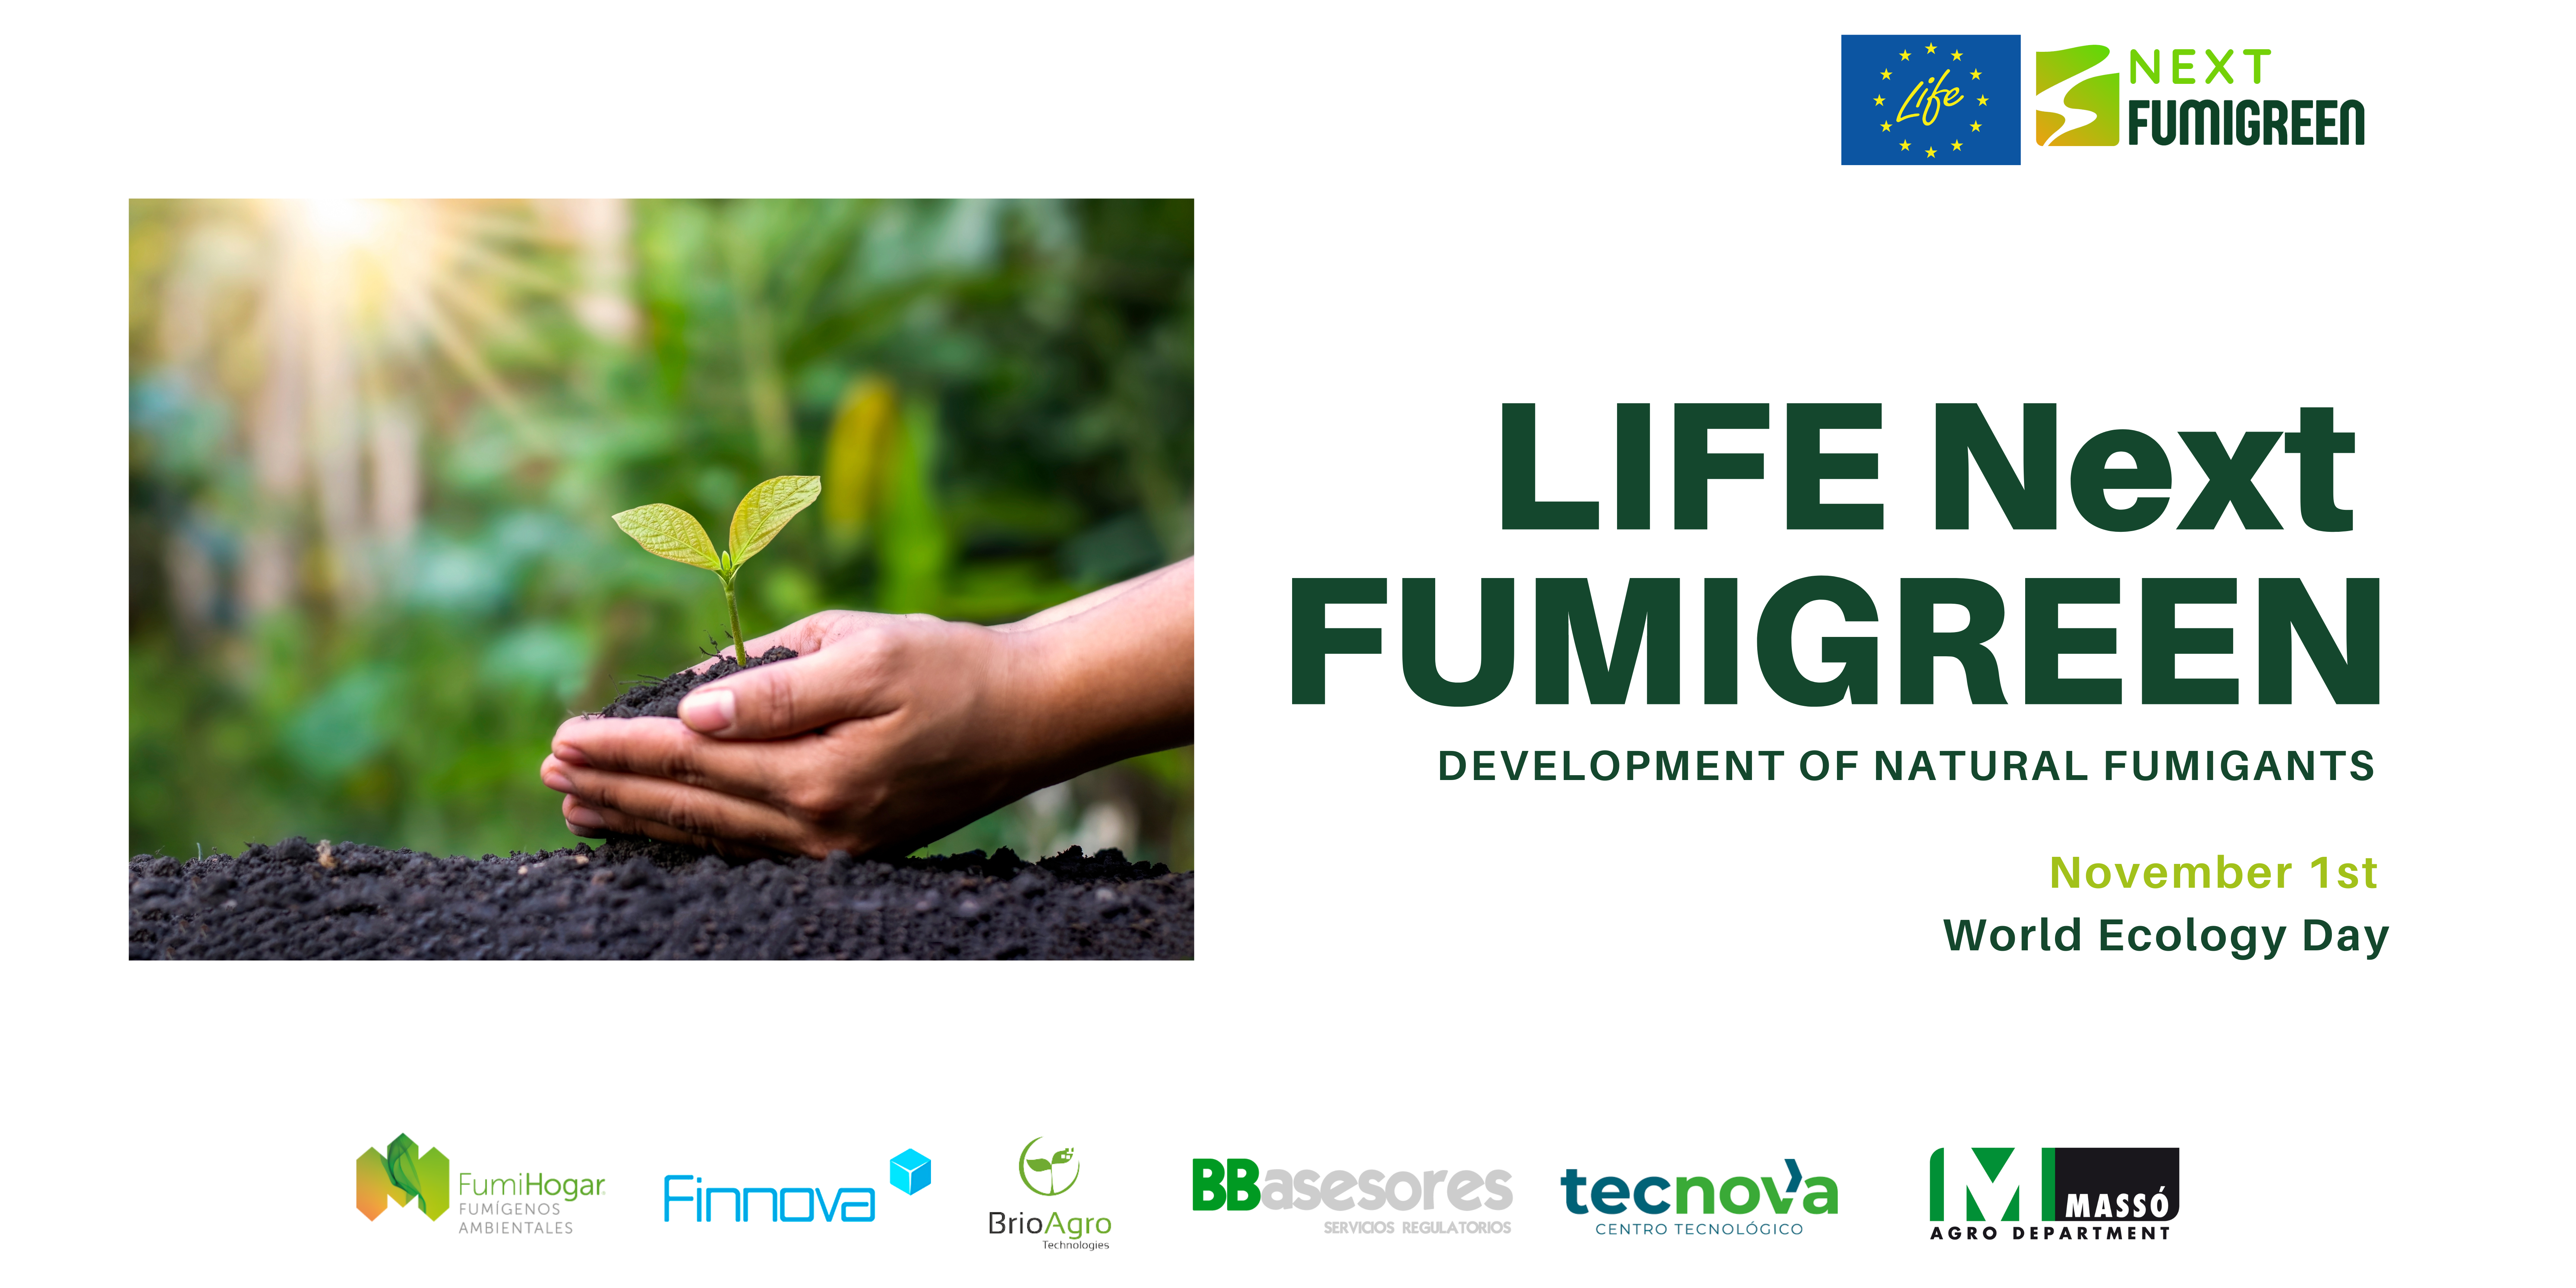 LIFE NextFUMIGREEN´s natural fumigants contribute to good eco-friendly practices in agriculture